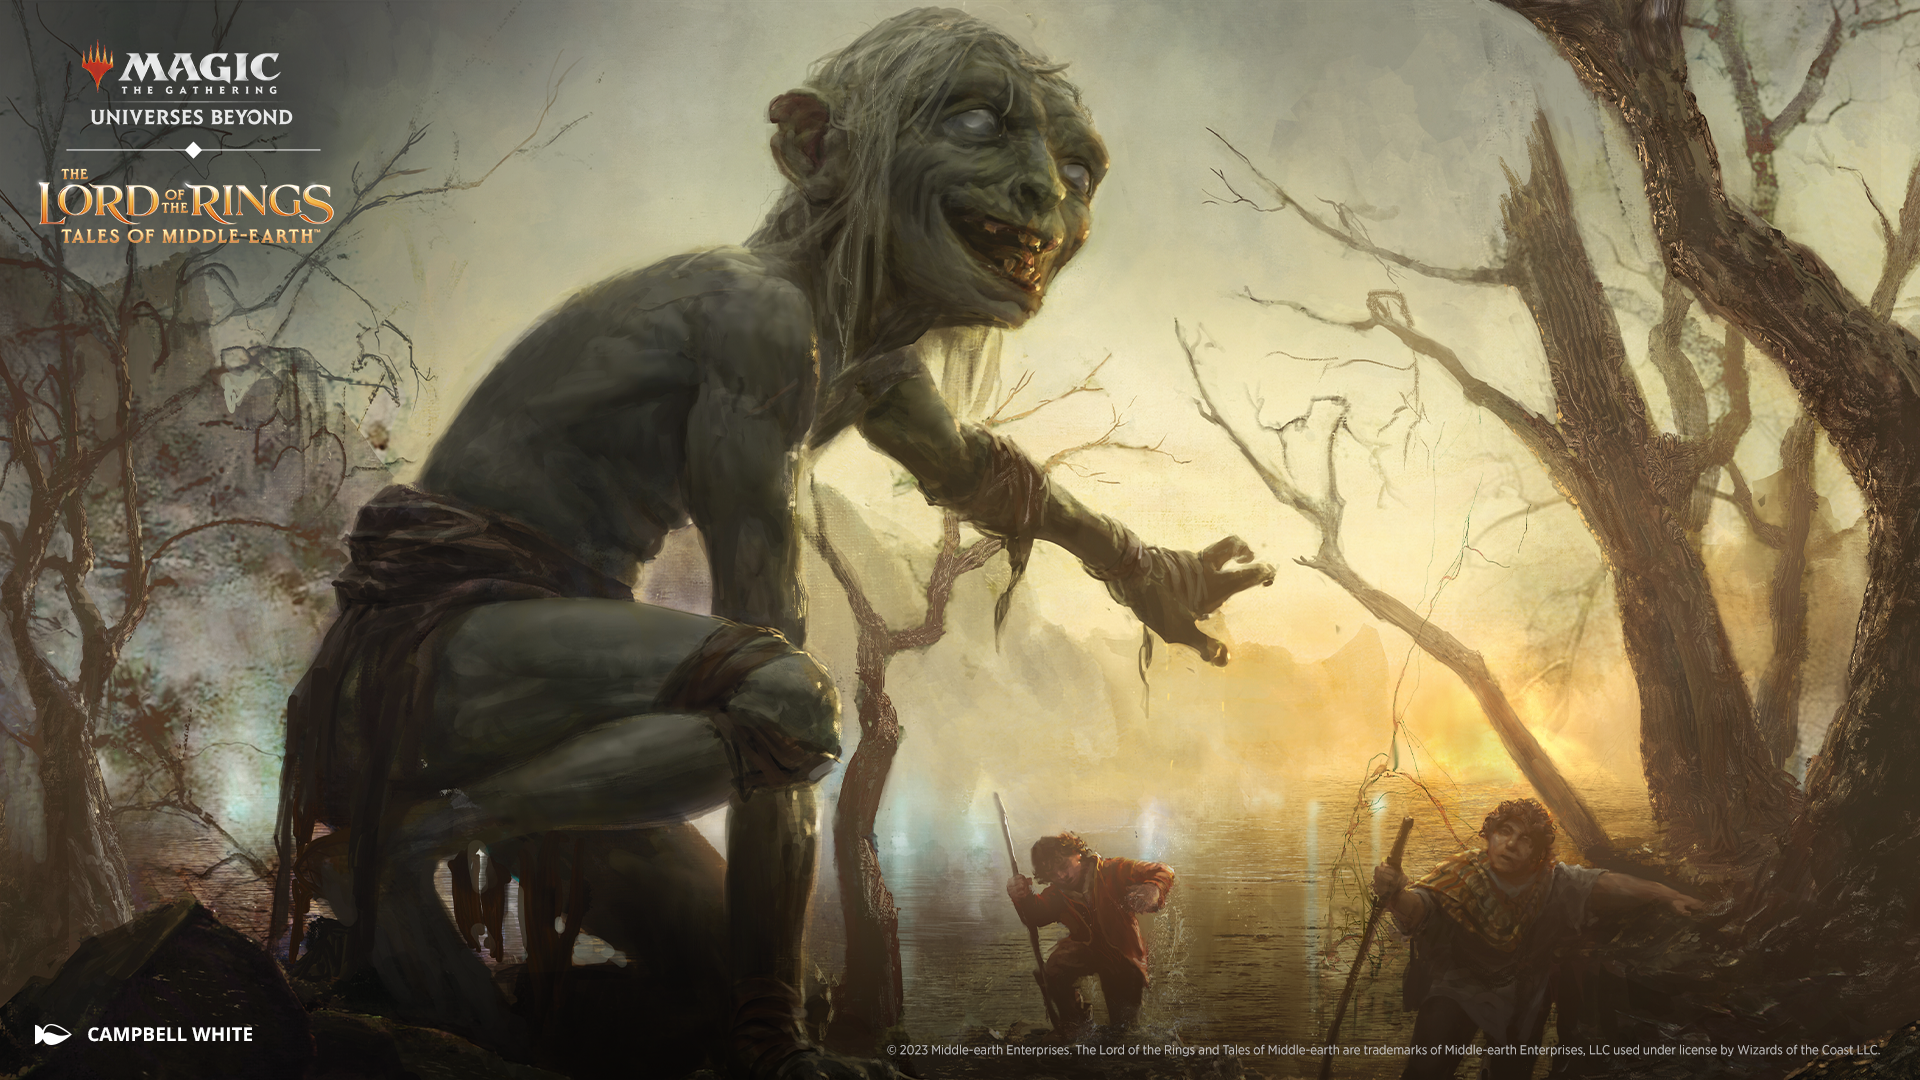 So Powerful! Is This Real?, Gollum Obsessed Stalker, Lord of the Rings  Middle-Earth Spoilers